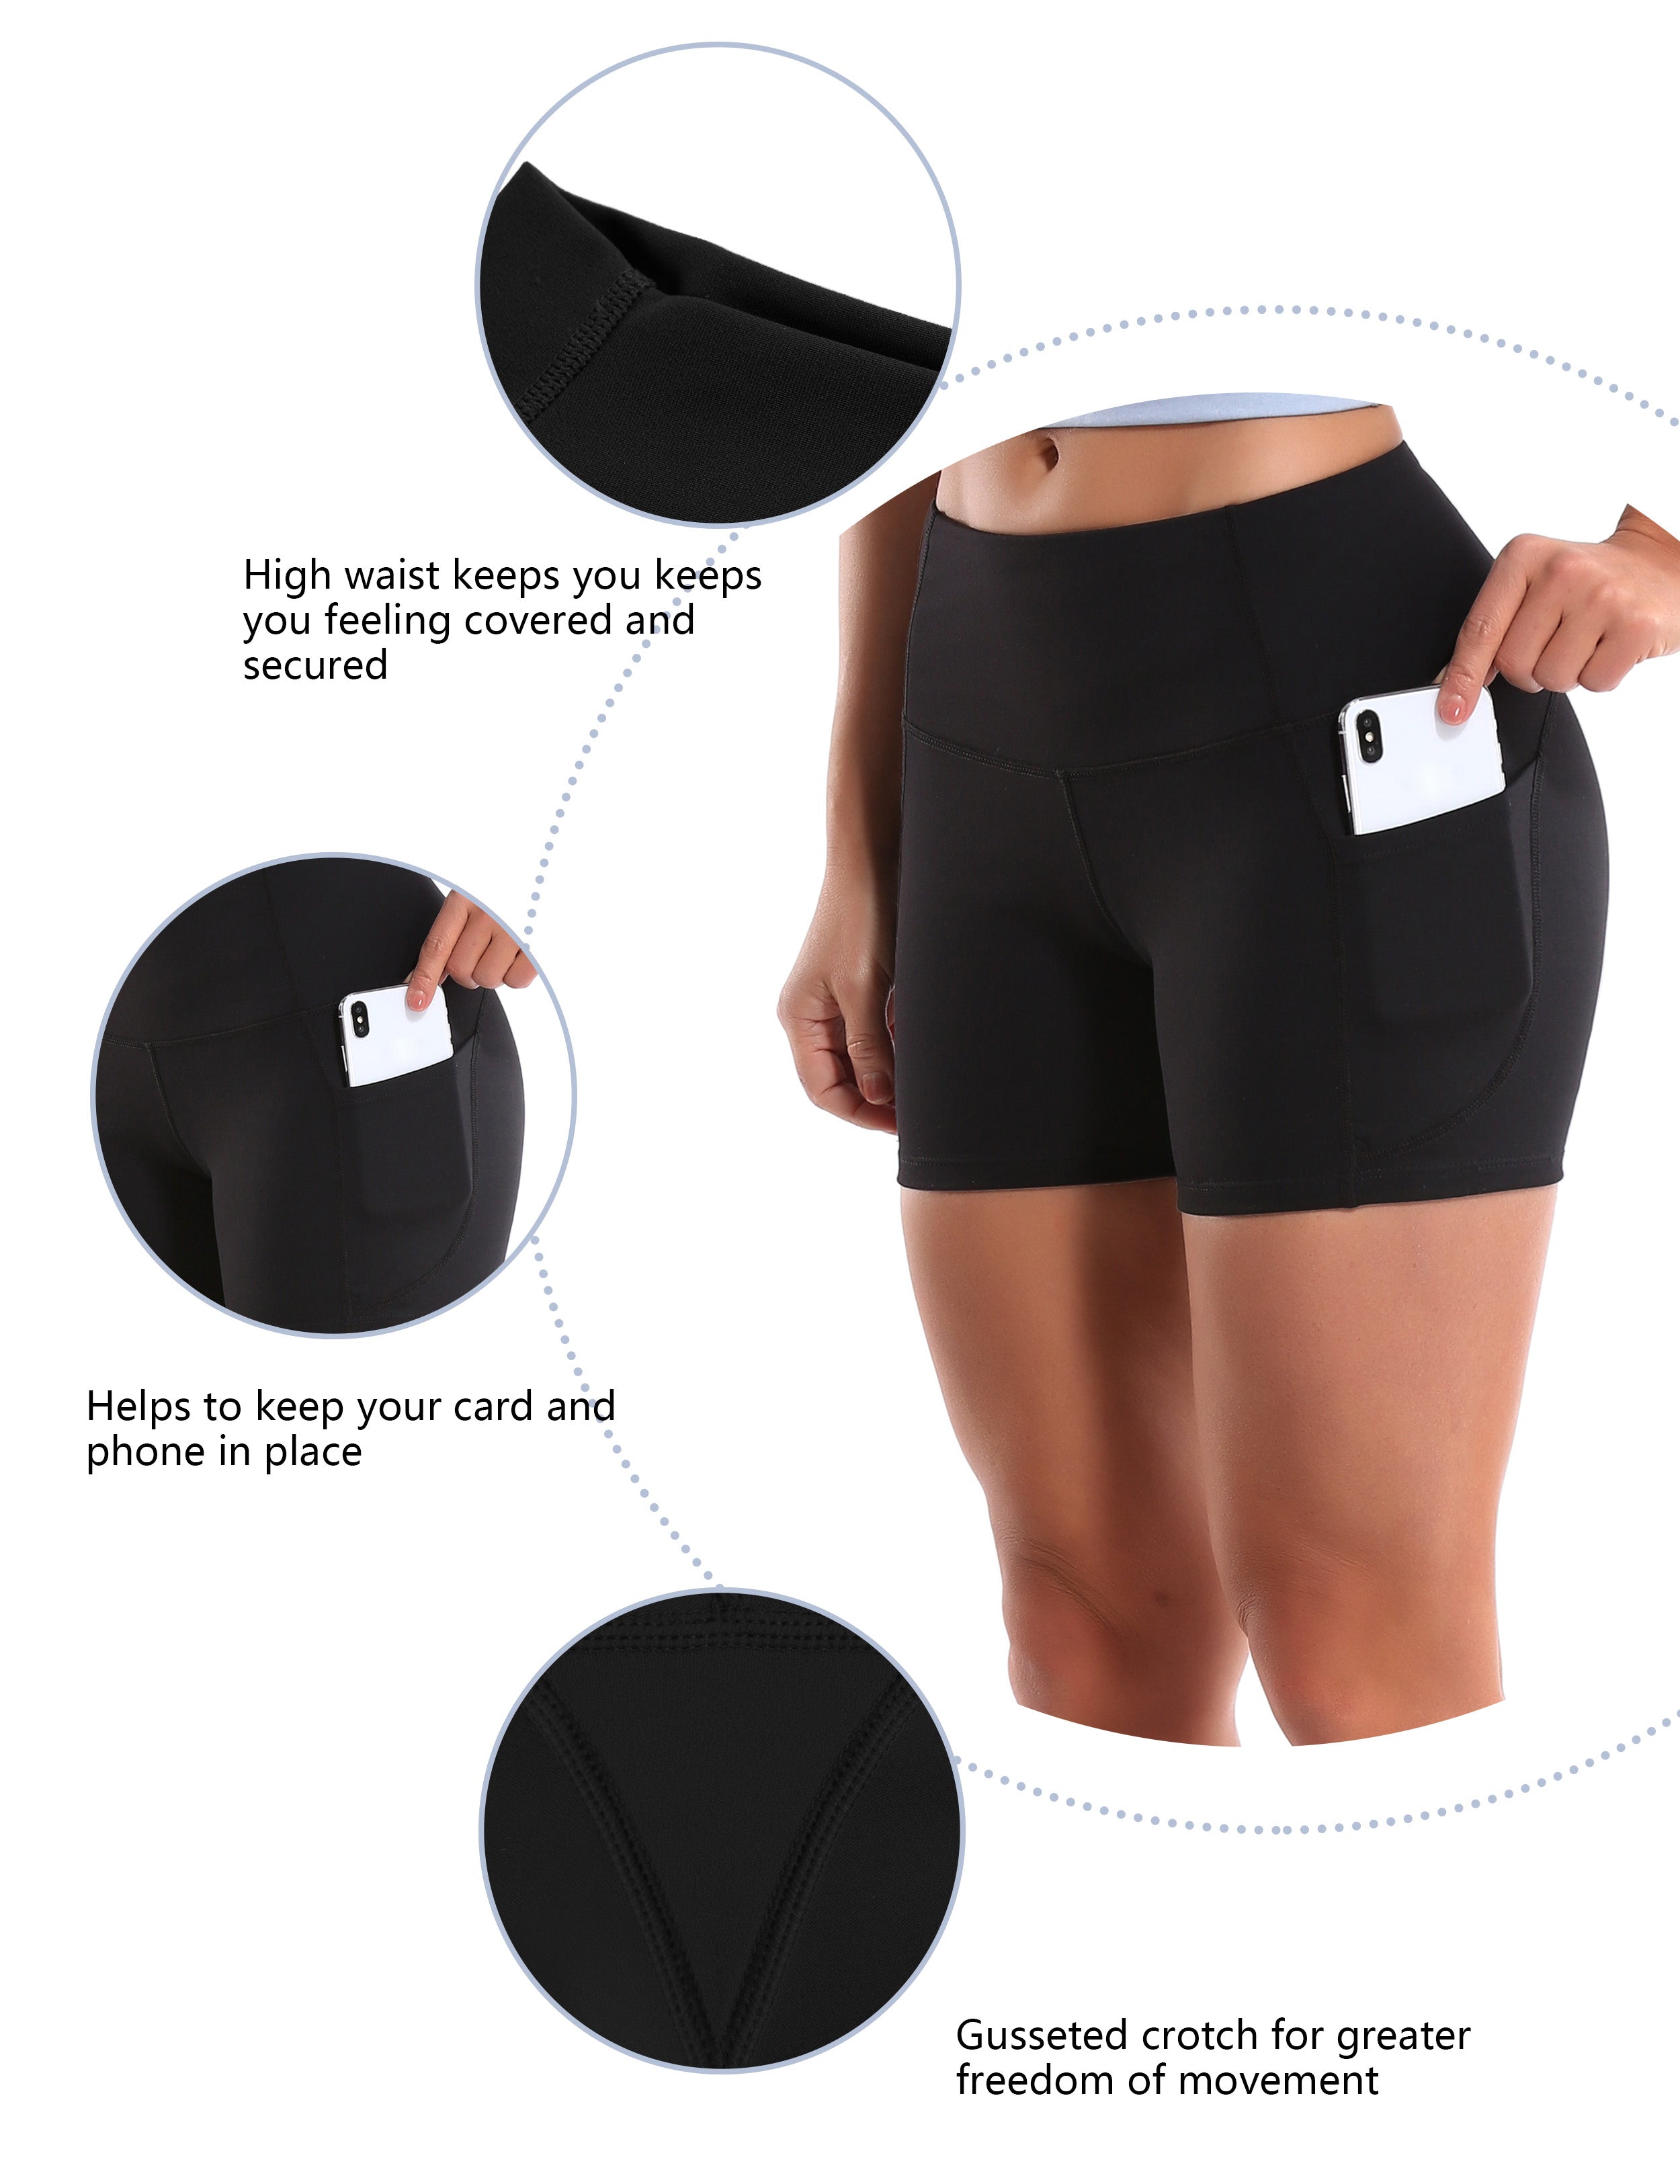 High Waist Side Pockets Golf Shorts black Softest-ever fabric High elasticity 4-way stretch Fabric doesn't attract lint easily No see-through Moisture-wicking Machine wash 88% Nylon, 12% Spandex